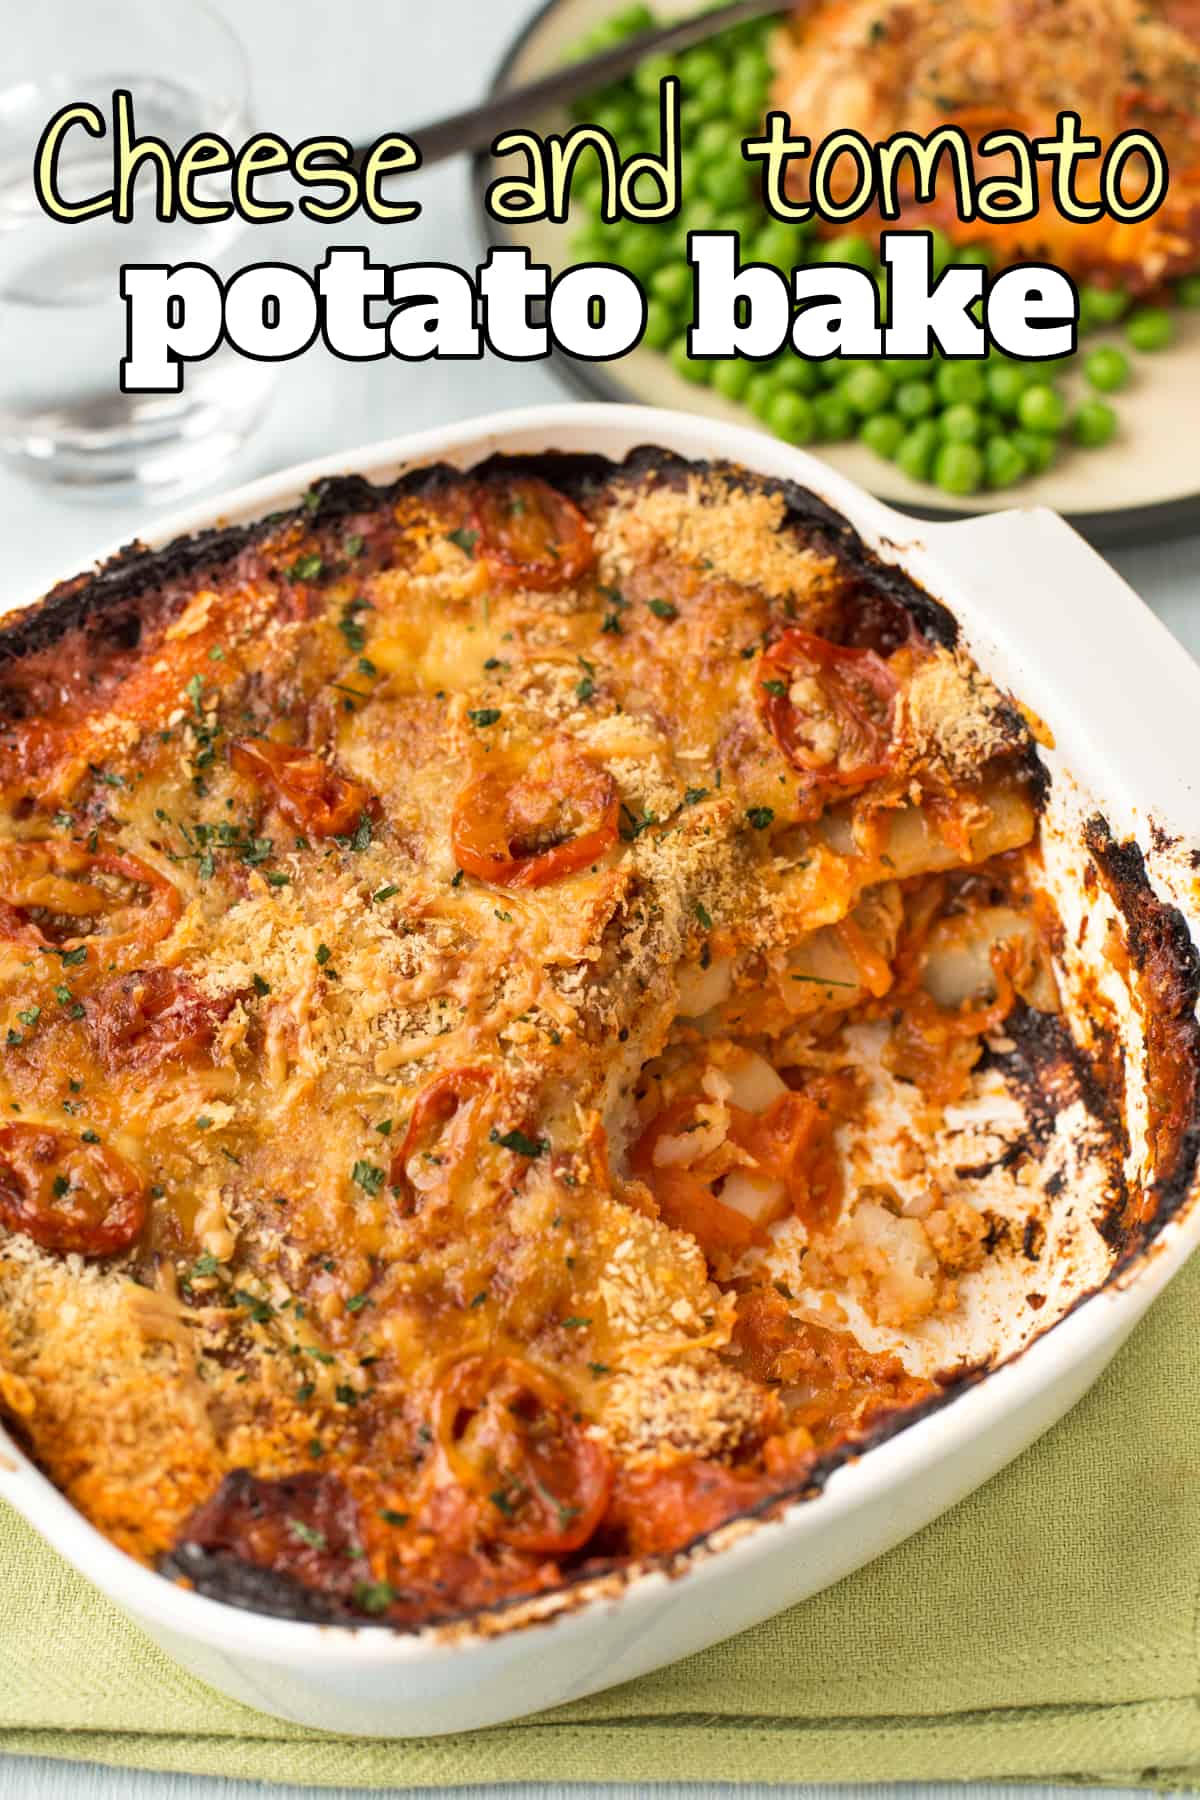 A cheese and tomato potato bake in a baking dish with a scoop removed.